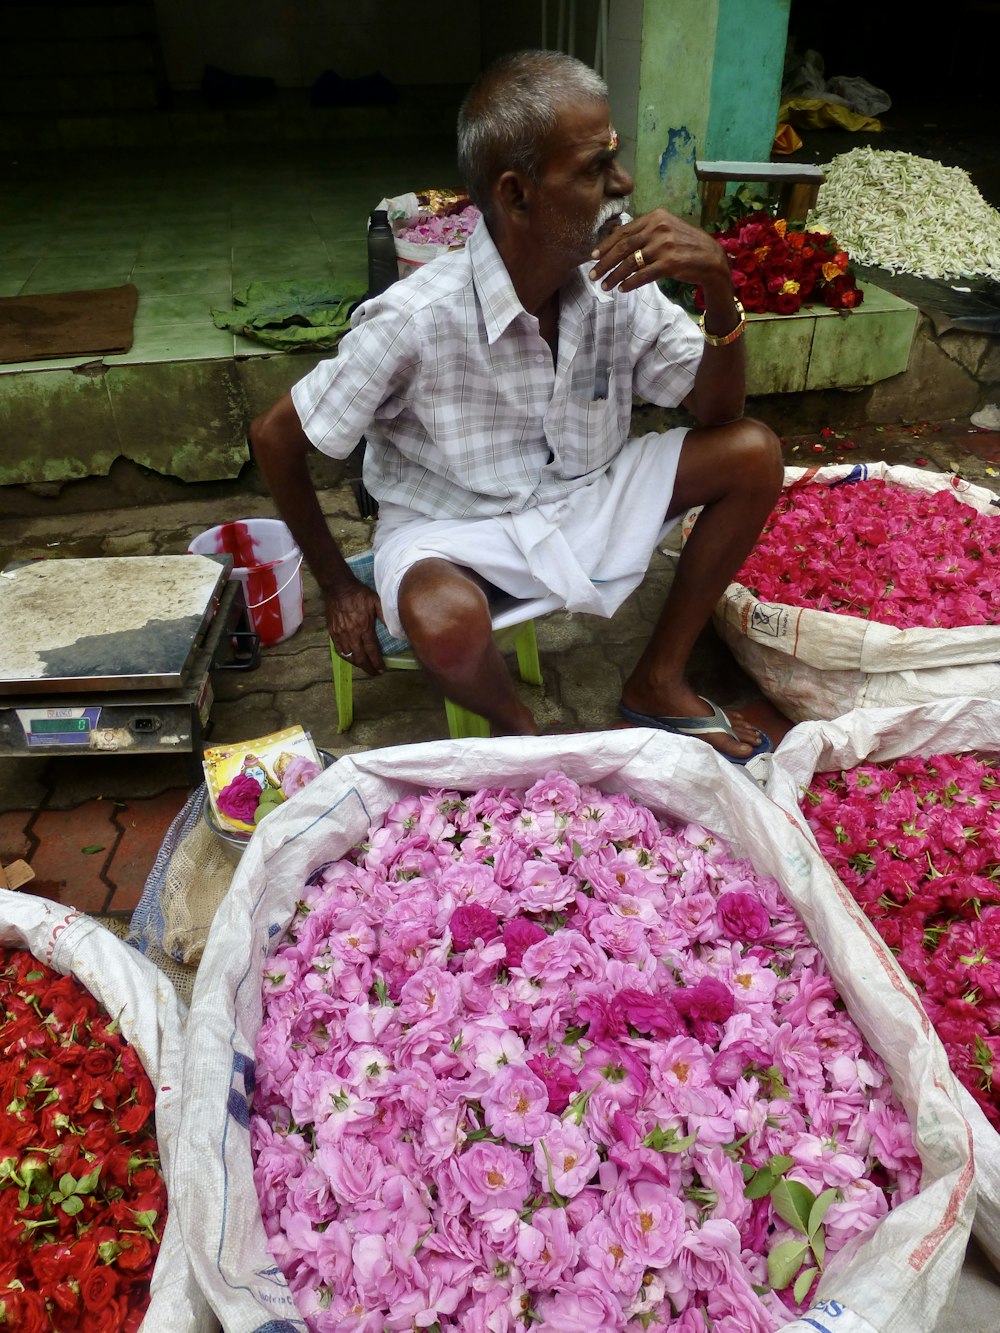 a man sitting on the ground surrounded by bags of flowers